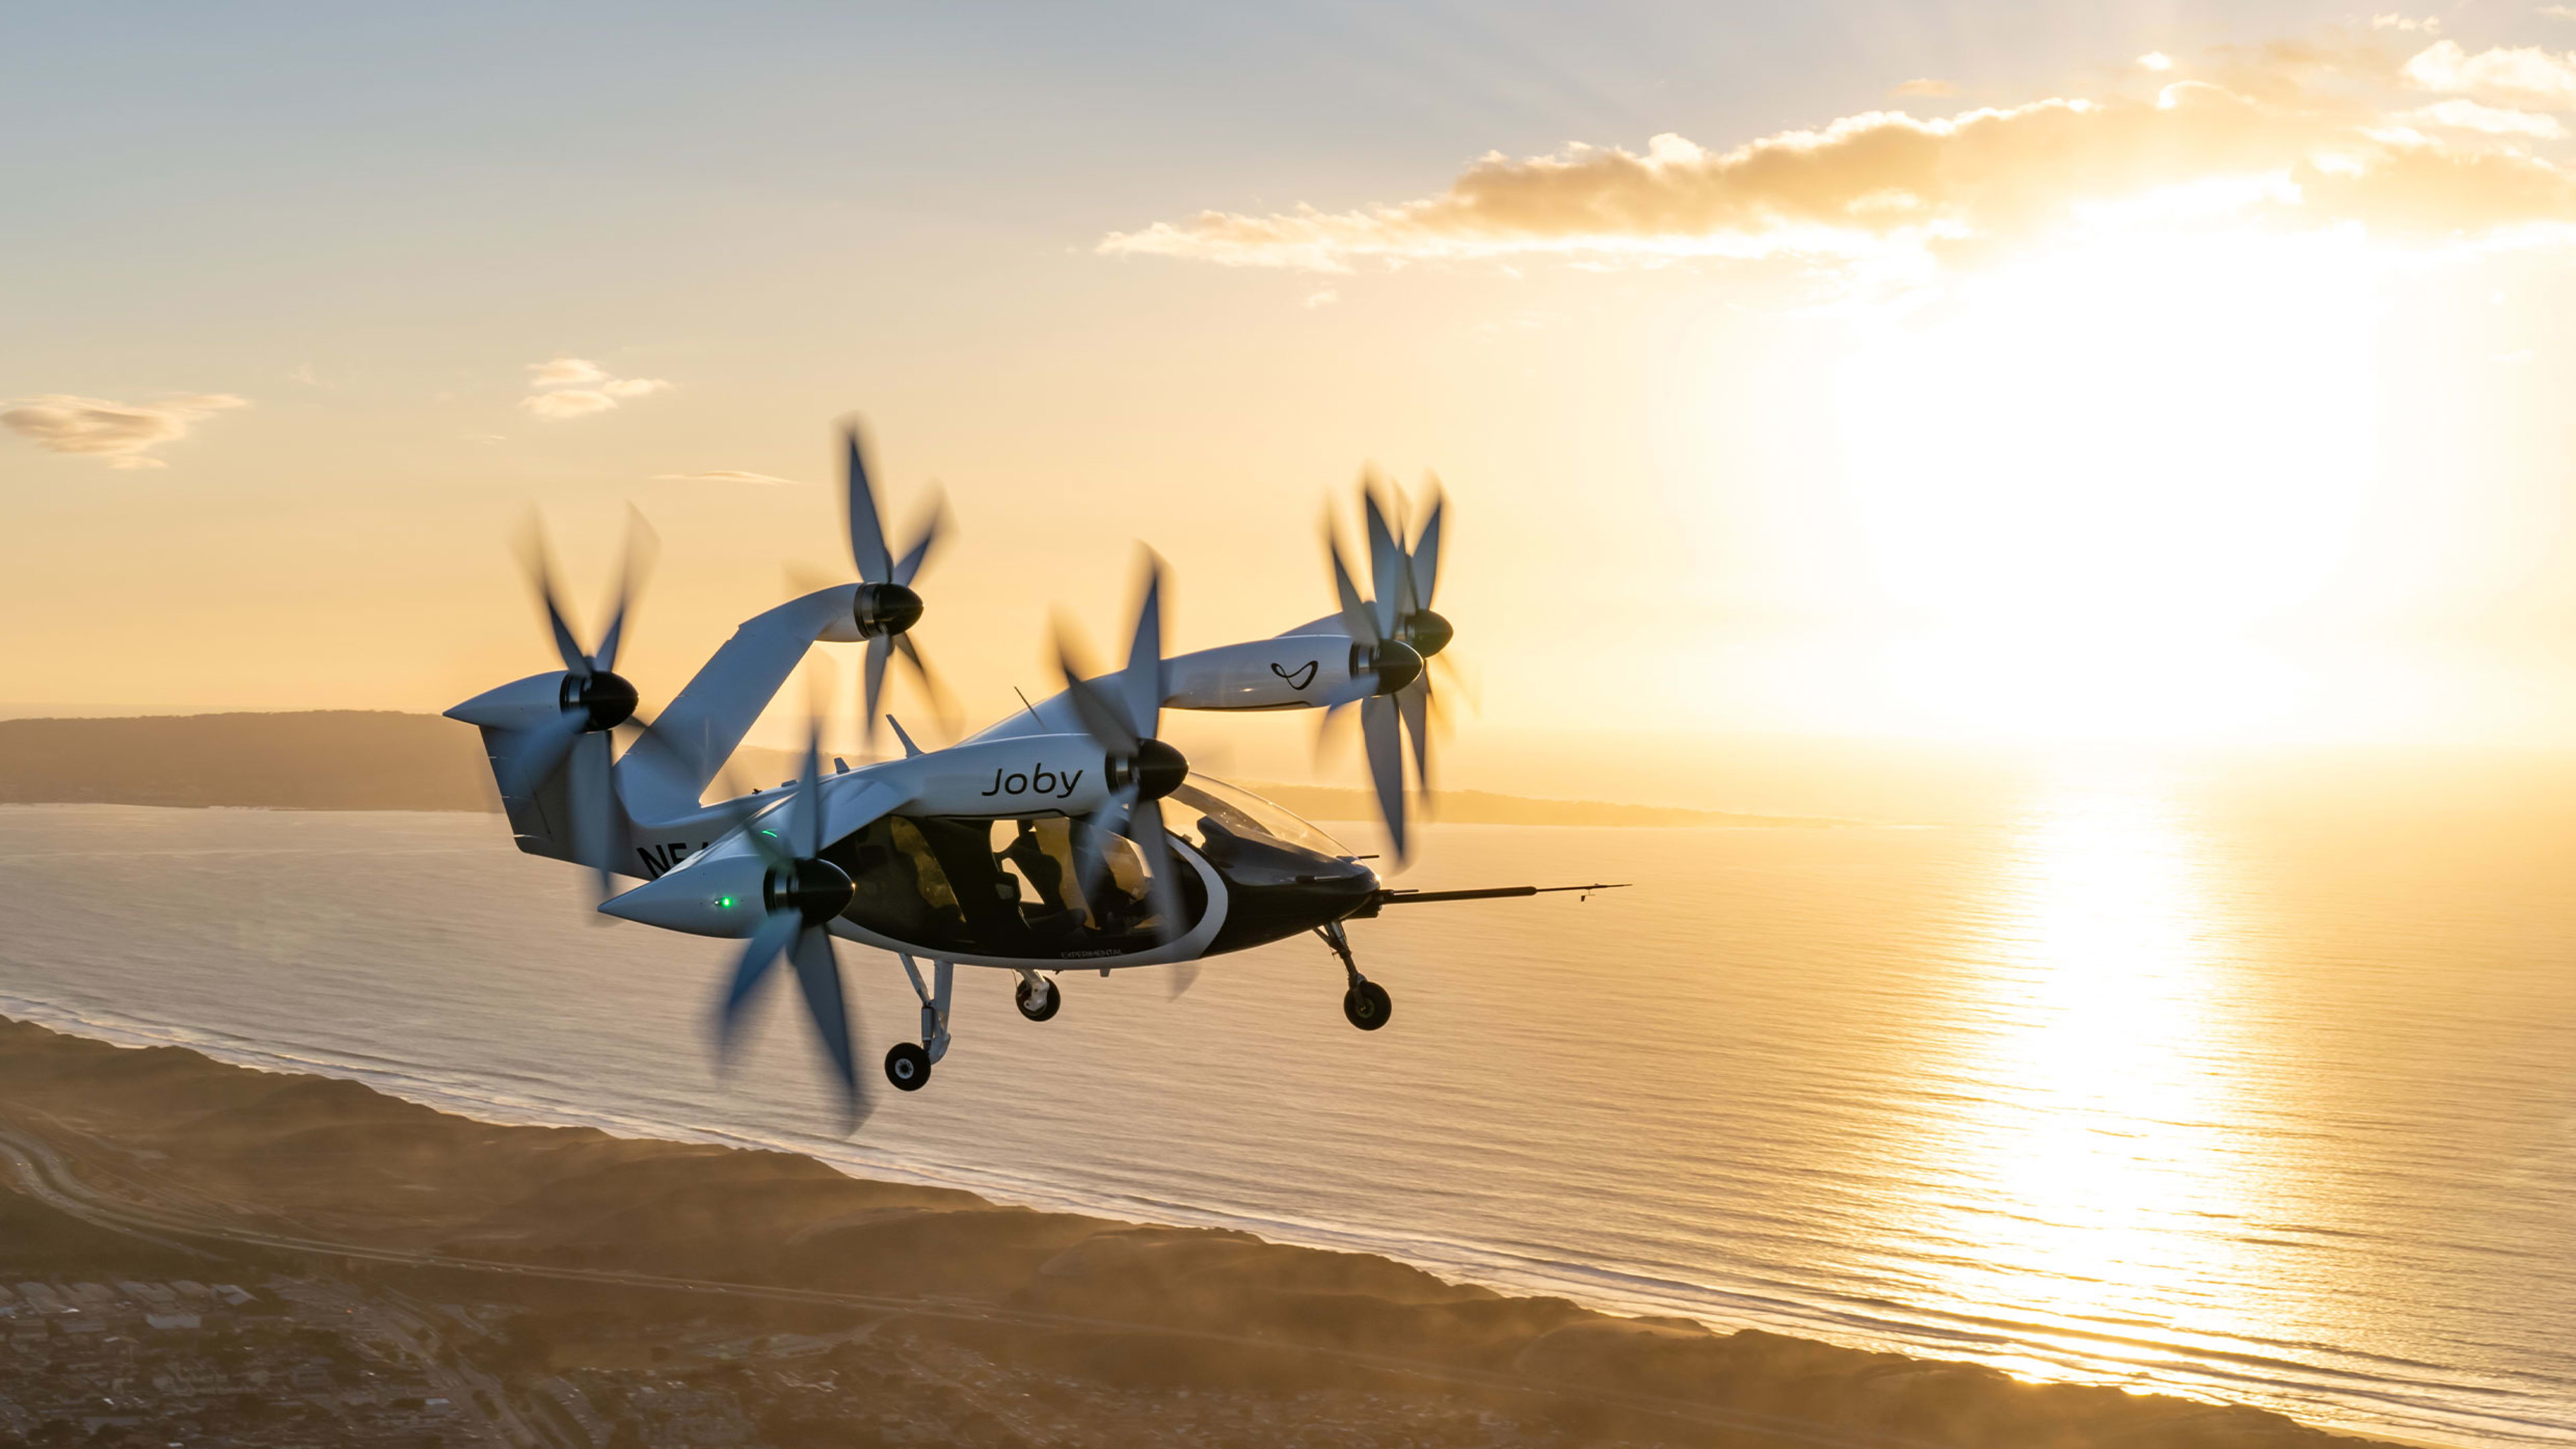 Joby Aviation reaches new FAA milestone as its electric flying vehicles get closer to takeoff